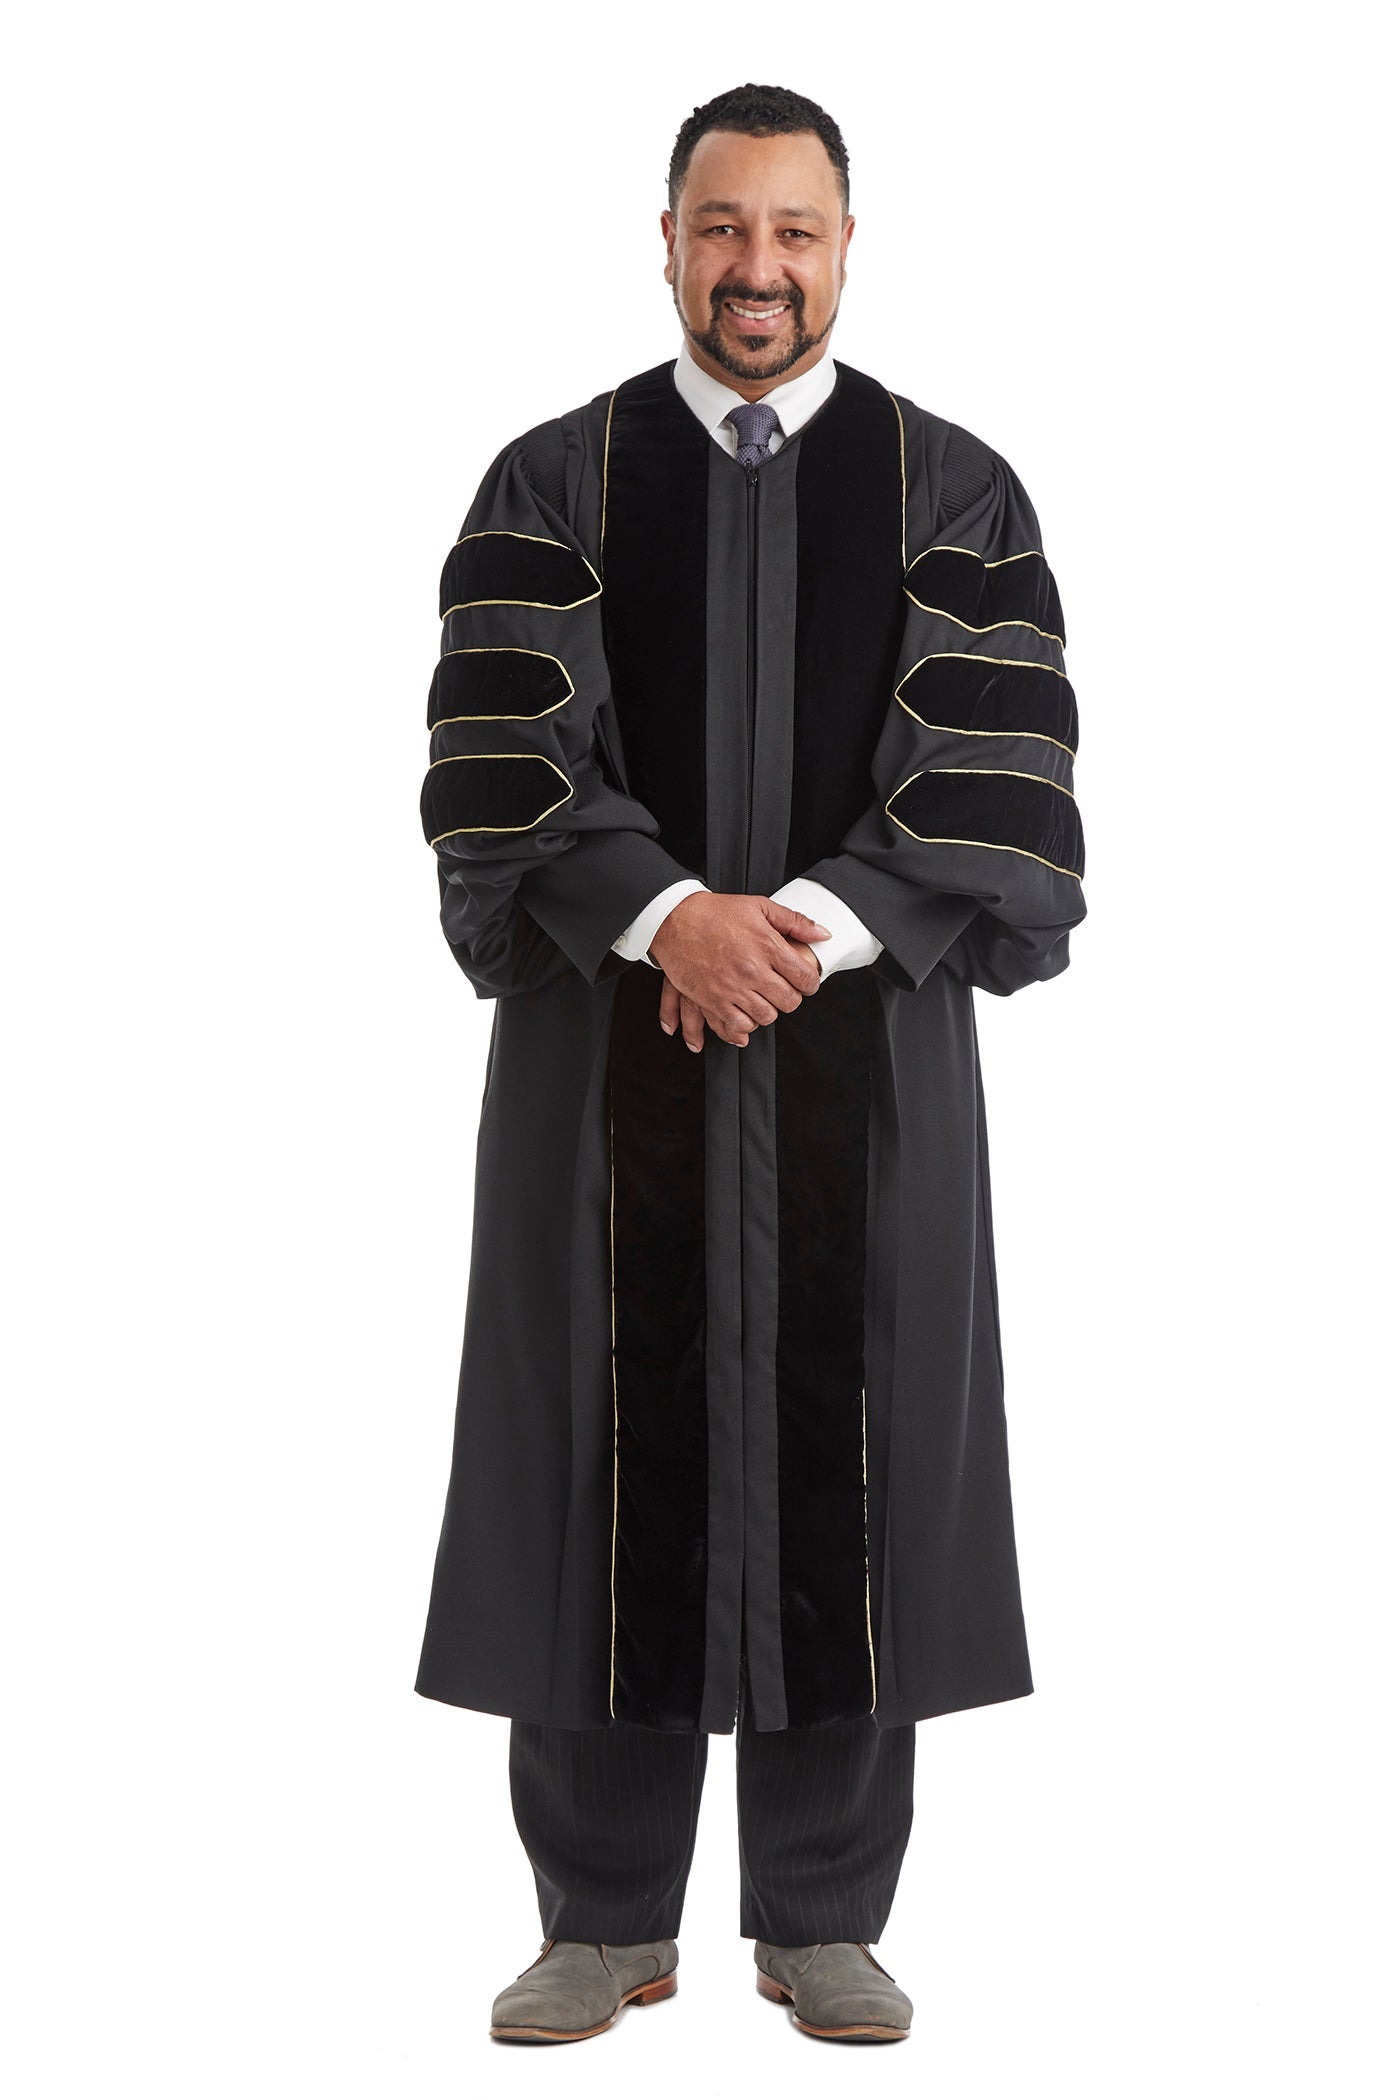 Doctoral Gown for University of Colorado Boulder